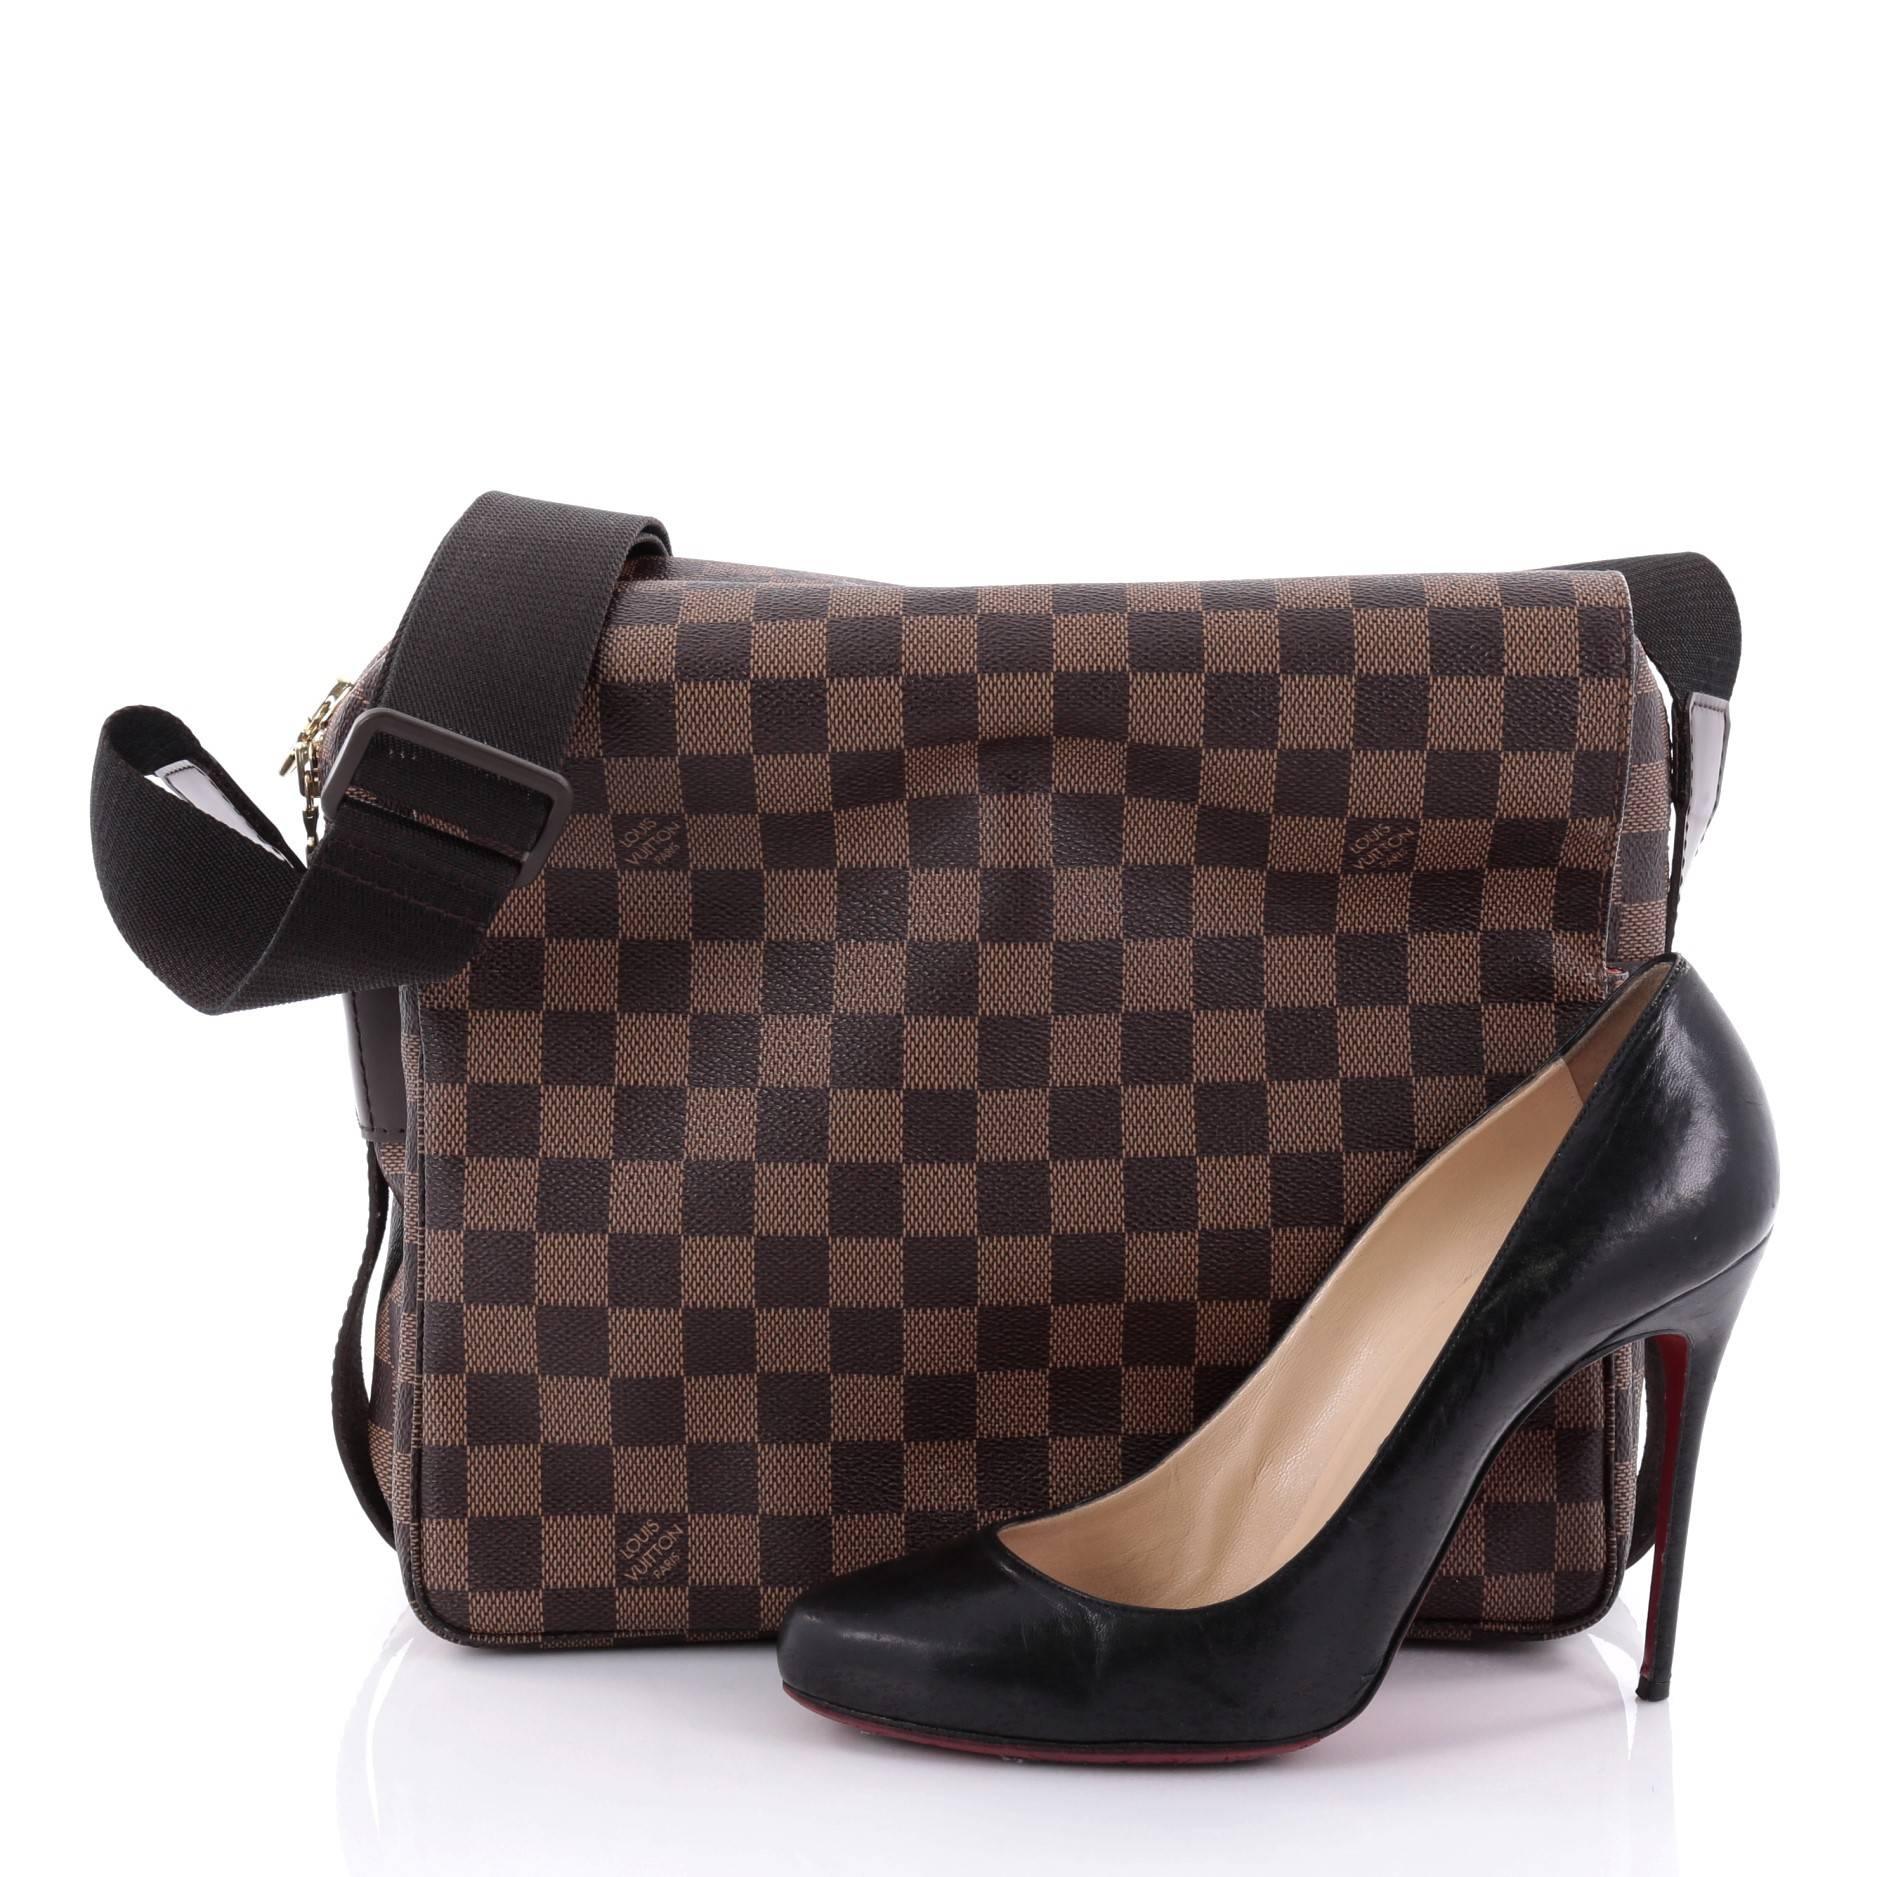 This authentic Louis Vuitton Naviglio Handbag Damier is perfect for the style conscious man or woman on the go. Crafted from damier ebene coated canvas, this chic bag features wide canvas adjustable strap, large dual flap design and gold-tone